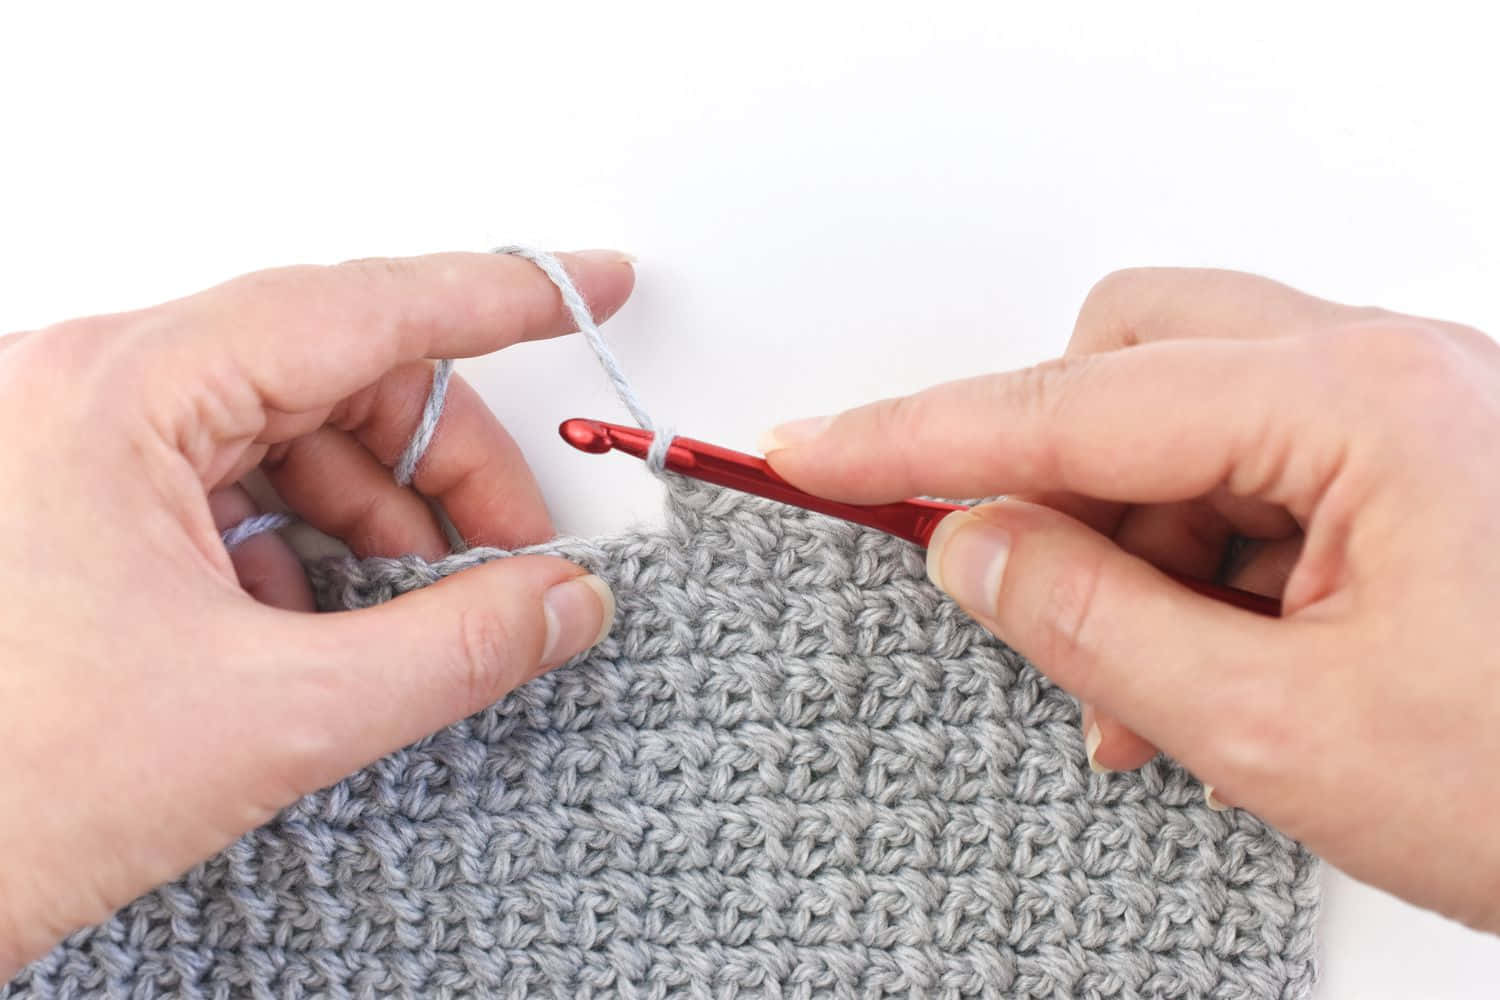 A Person Is Holding A Crochet Hook And A Crochet Stitch